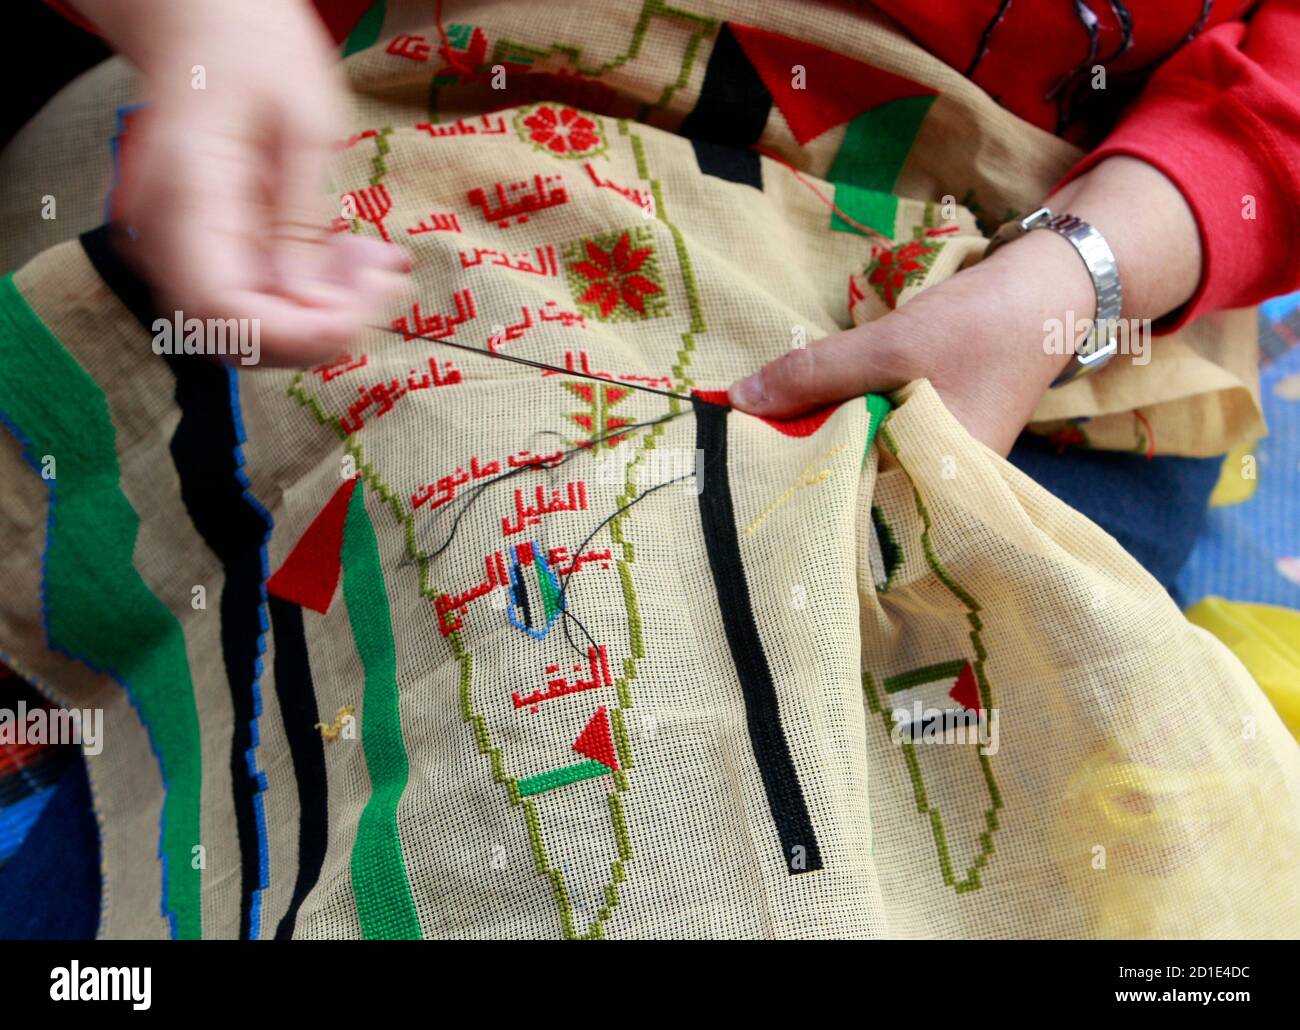 A Palestinian woman embroiders a map of Palestine to mark the 61st anniversary of Nakba at the Burj al-Barajneh refugee camp in Beirut May 15, 2009. Palestinians mark Nakba as a day of mourning for the establishment of Israel in 1948 after which an Arab-Israeli war brought the displacement of hundreds of thousands of Palestinians. REUTERS/Jamal Saidi   (LEBANON ANNIVERSARY POLITICS) Stock Photo